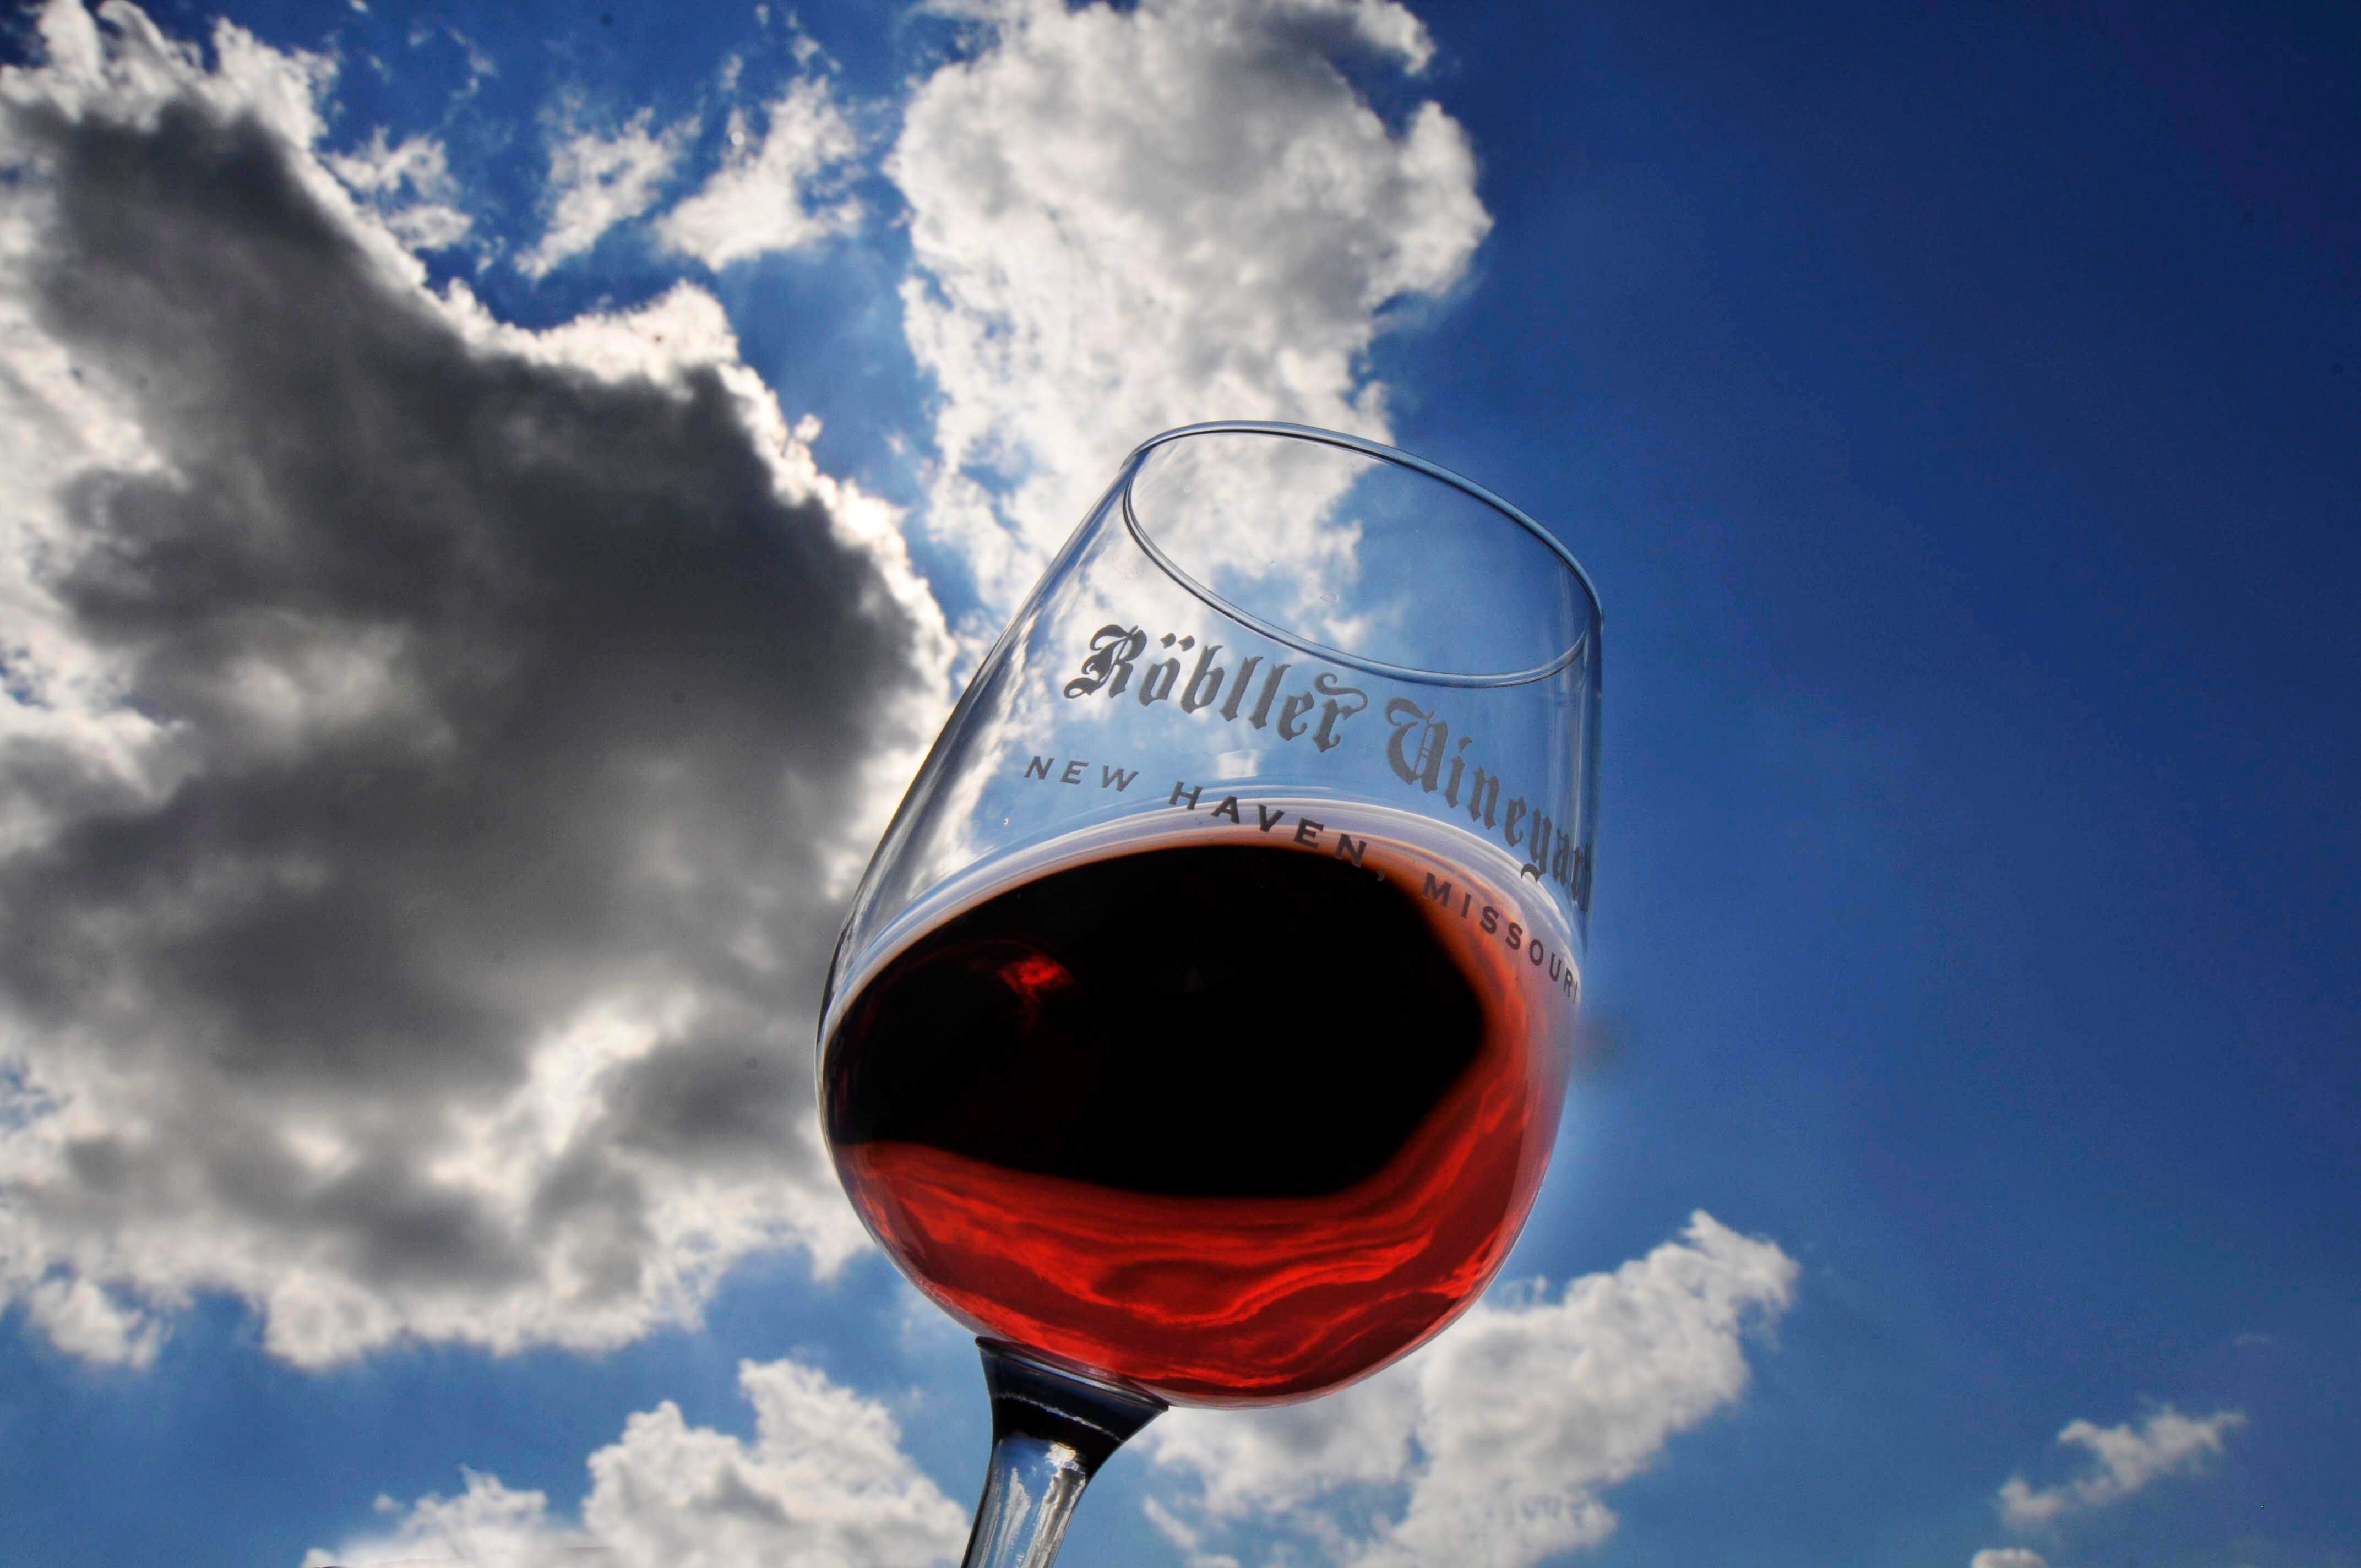 Röbller Vineyard and Winery- A glass of red wine held up to the sky.